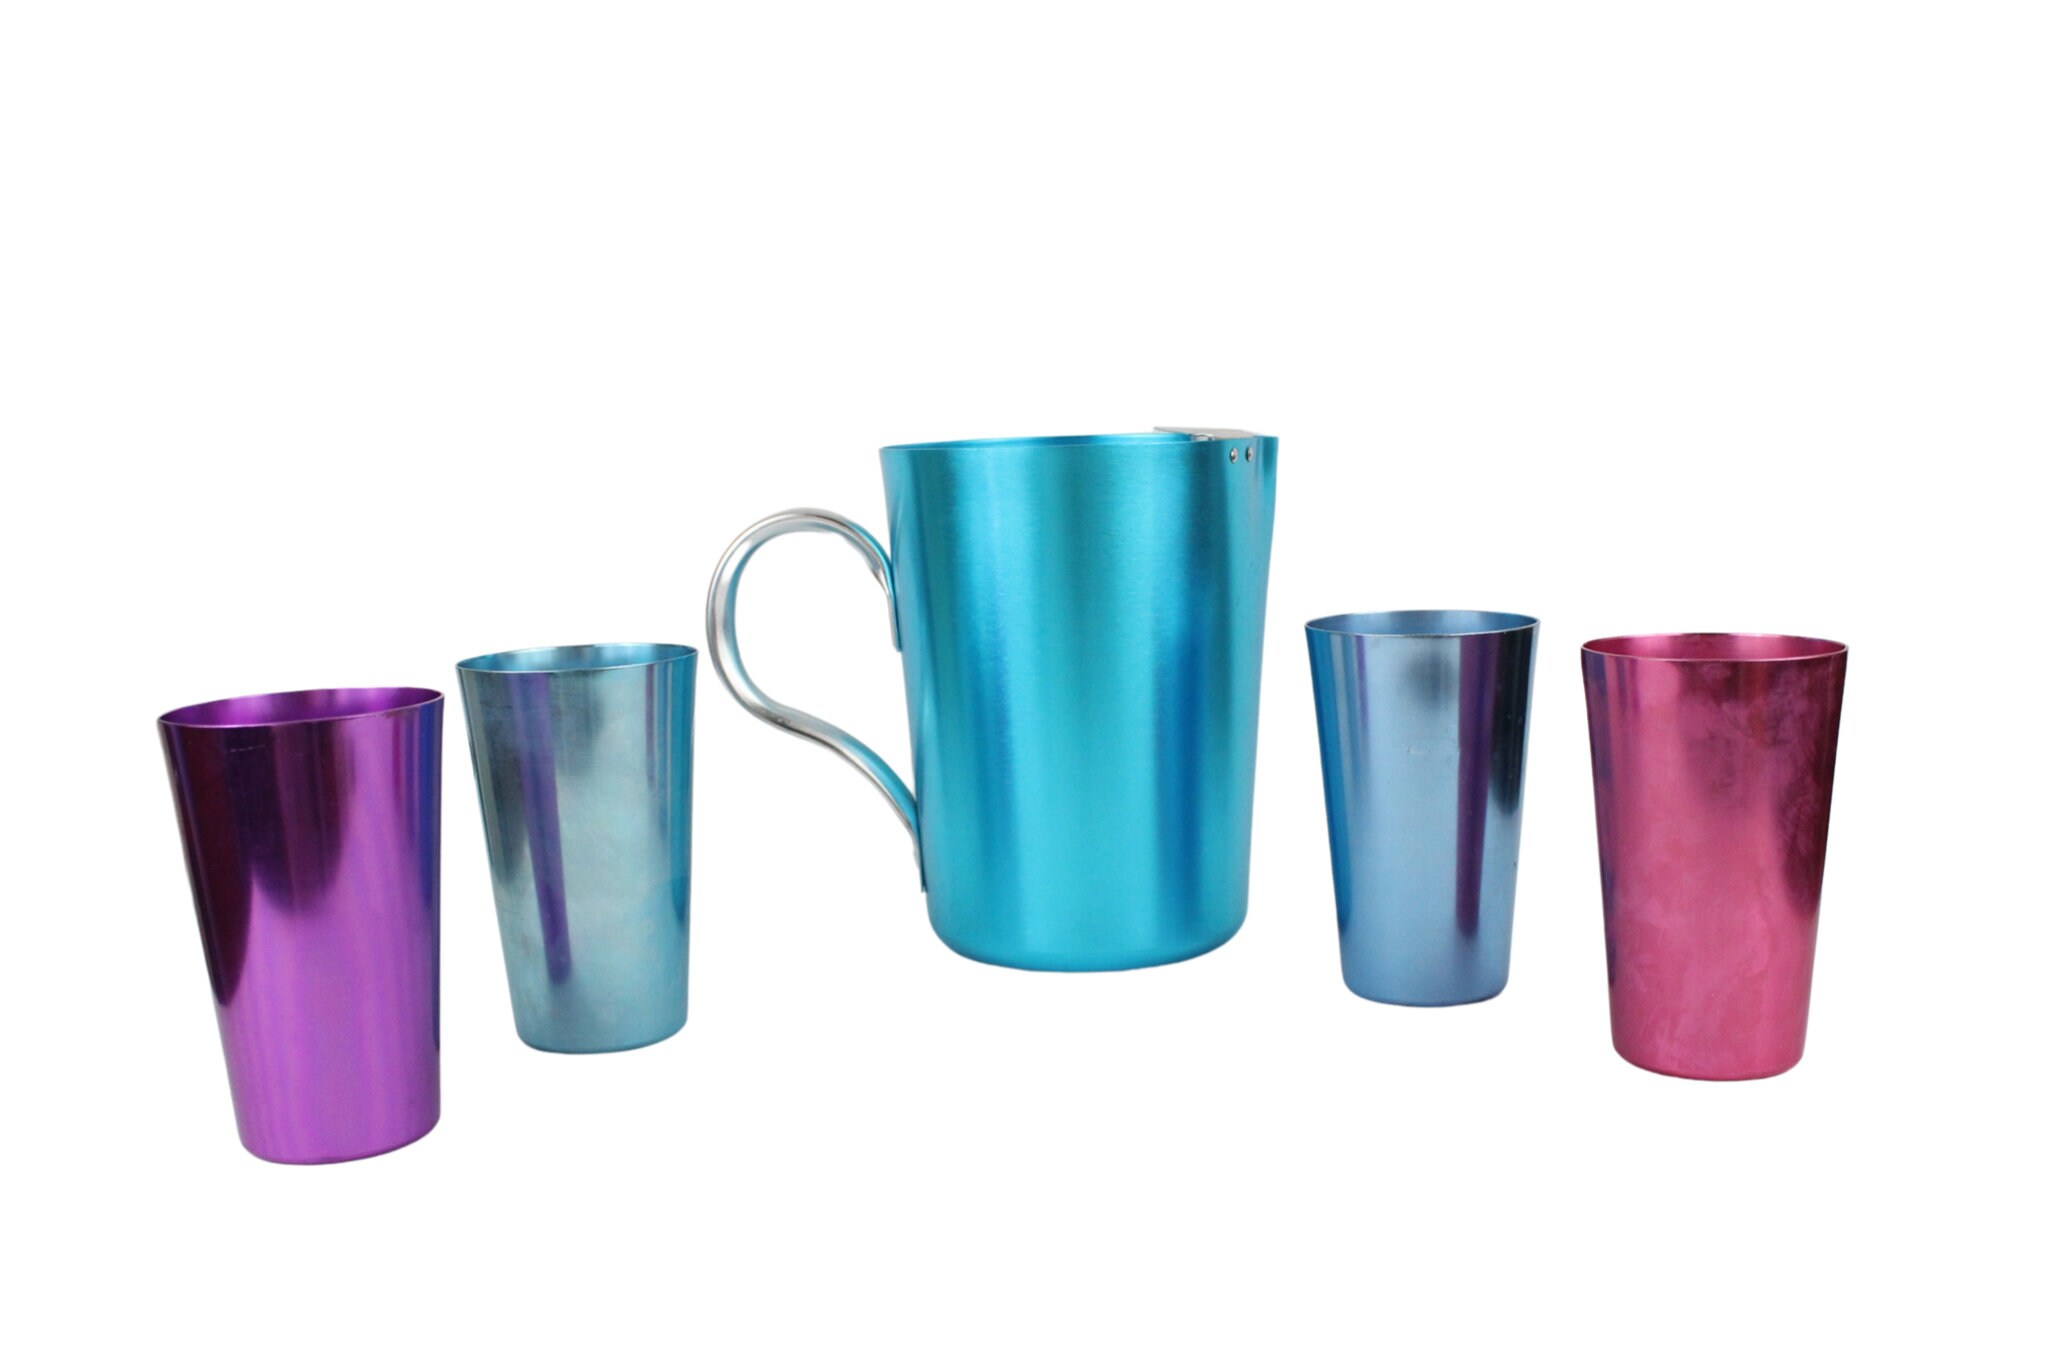 RVANest - Remember these? Set of 8 vintage aluminum tumblers and matching  pitcher. Perfect for your July 4th get-together. We're open all weekend  Saturday 10-5, Sunday 12-4 and Monday 11-5. Stop by